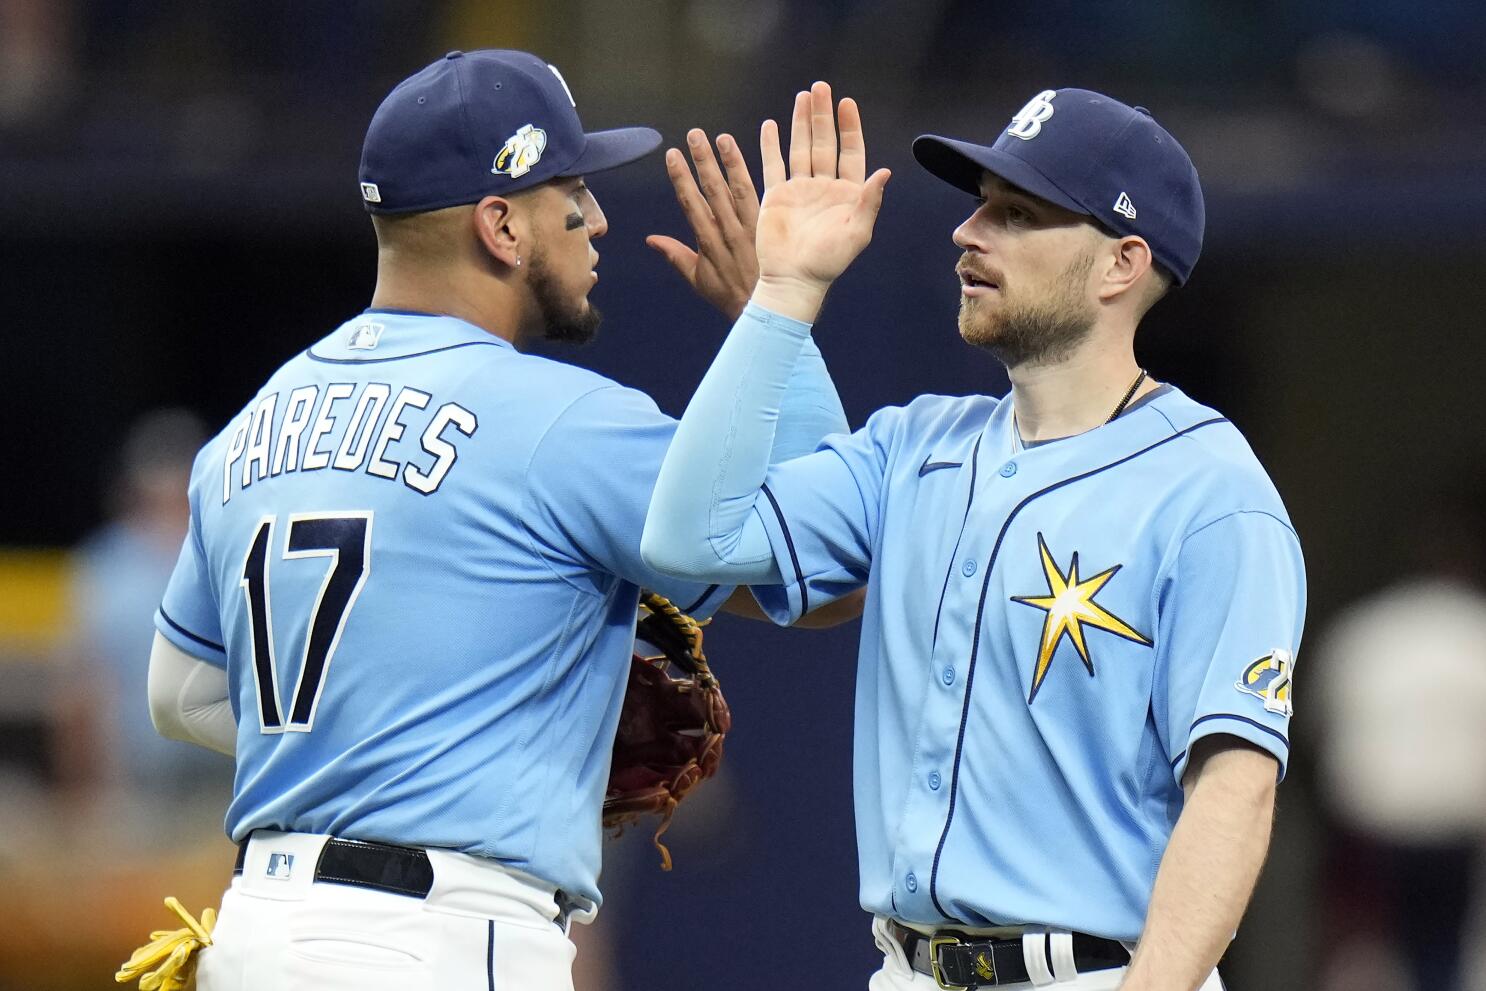 Rays at 9-0, best MLB start since 2003, after 11-0 rout - The San Diego  Union-Tribune